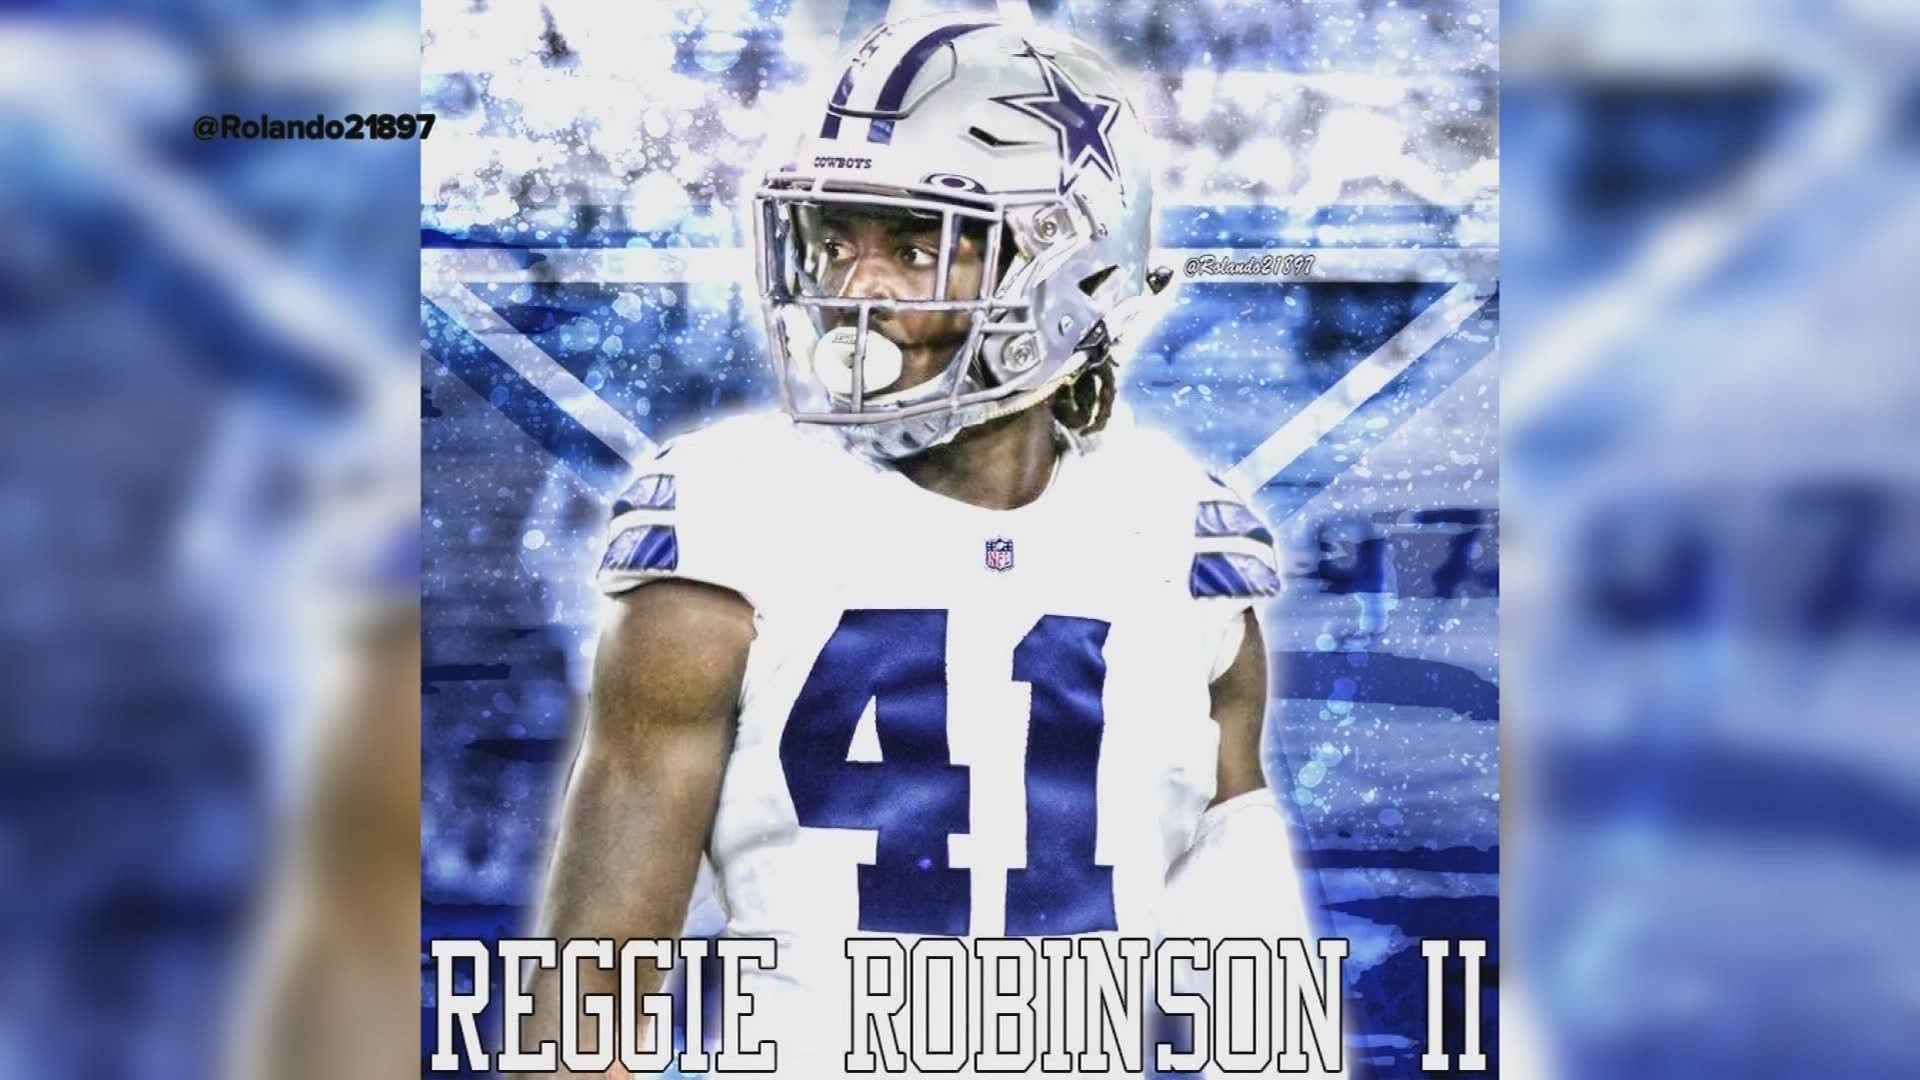 Cleburne product Reggie Robinson II will call AT&T Stadium home this fall, but it won't be his first game in a Cowboys venue.